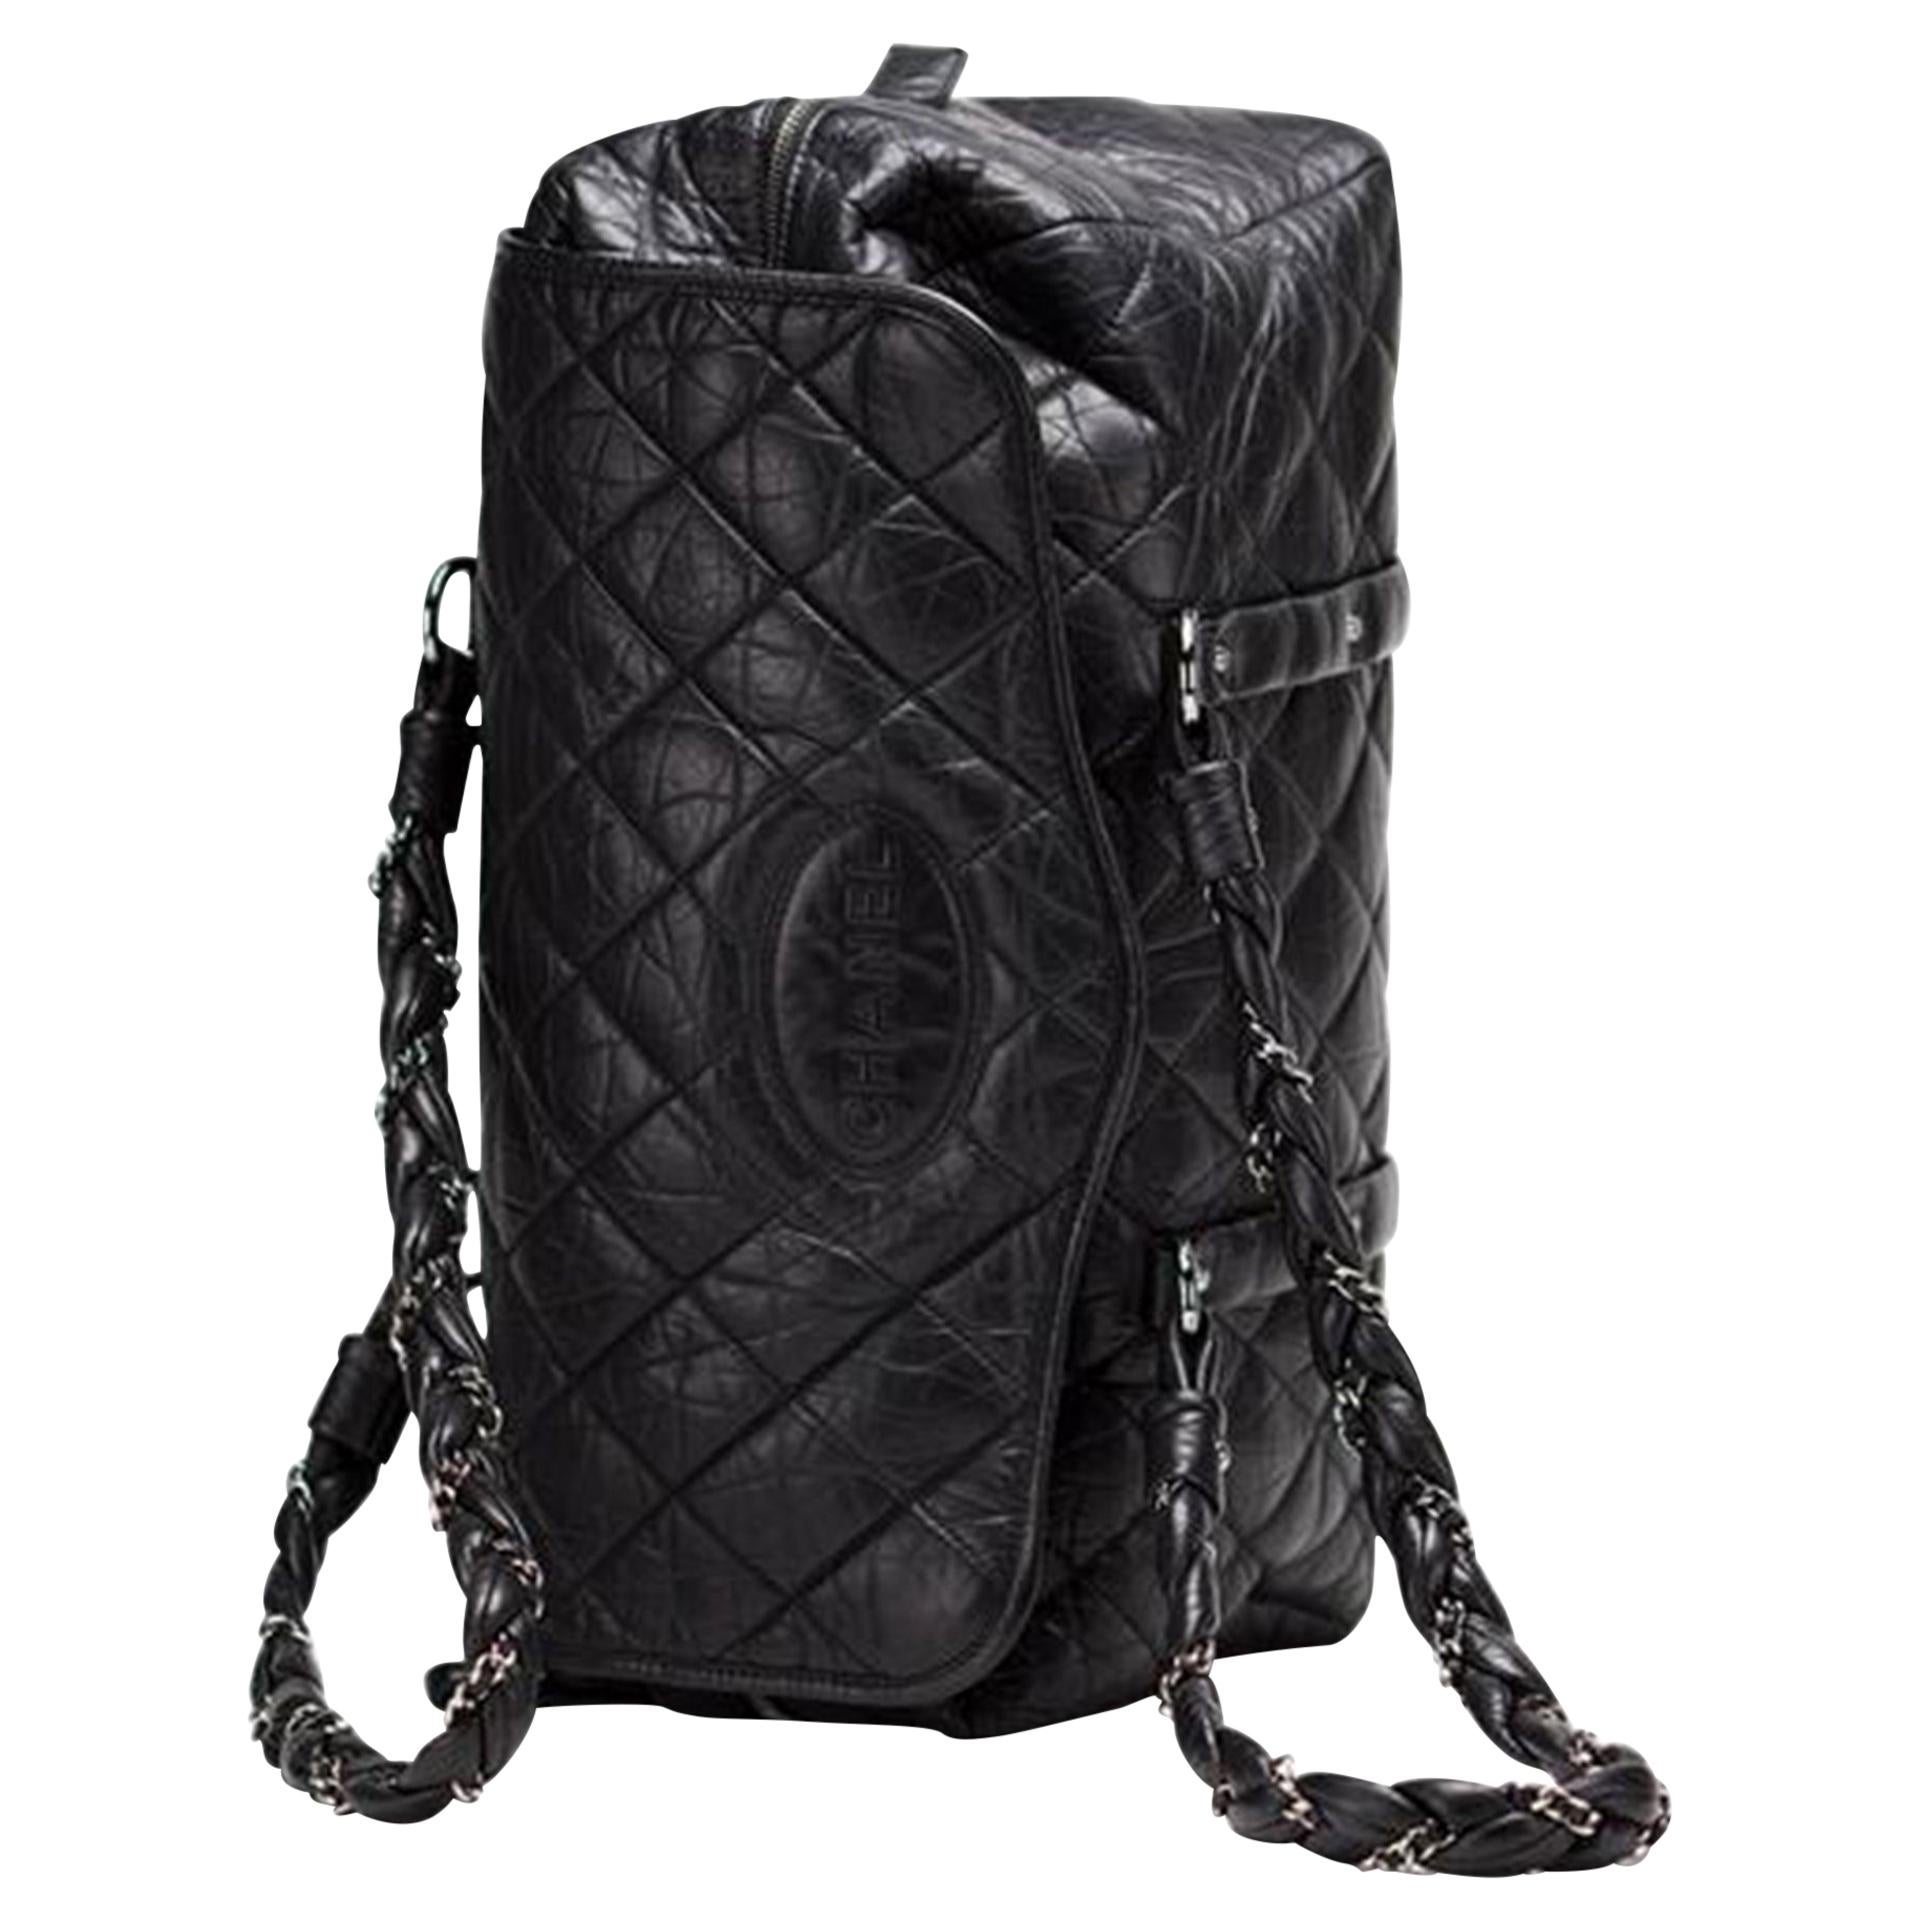 Chanel Timeless Classic Flap Quilted Distressed Large Blck